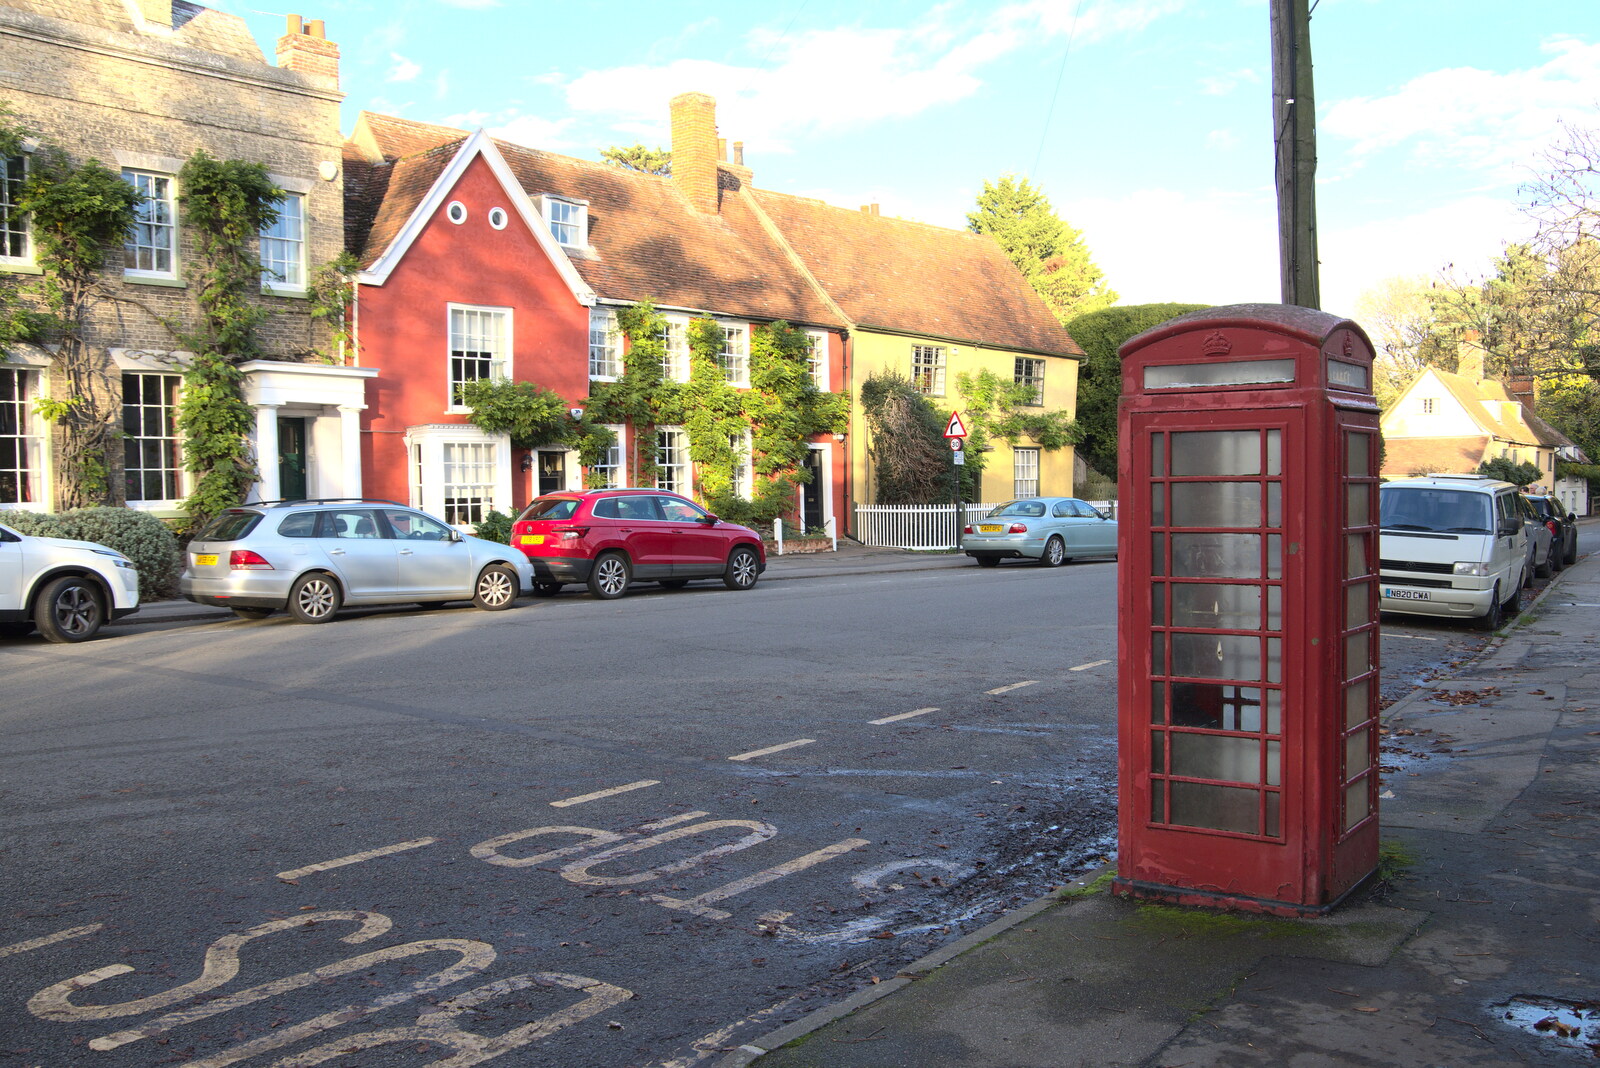 A Postcard from Flatford and Dedham, Suffolk and Essex, 9th November 2022: A K6 phonebox on the main street